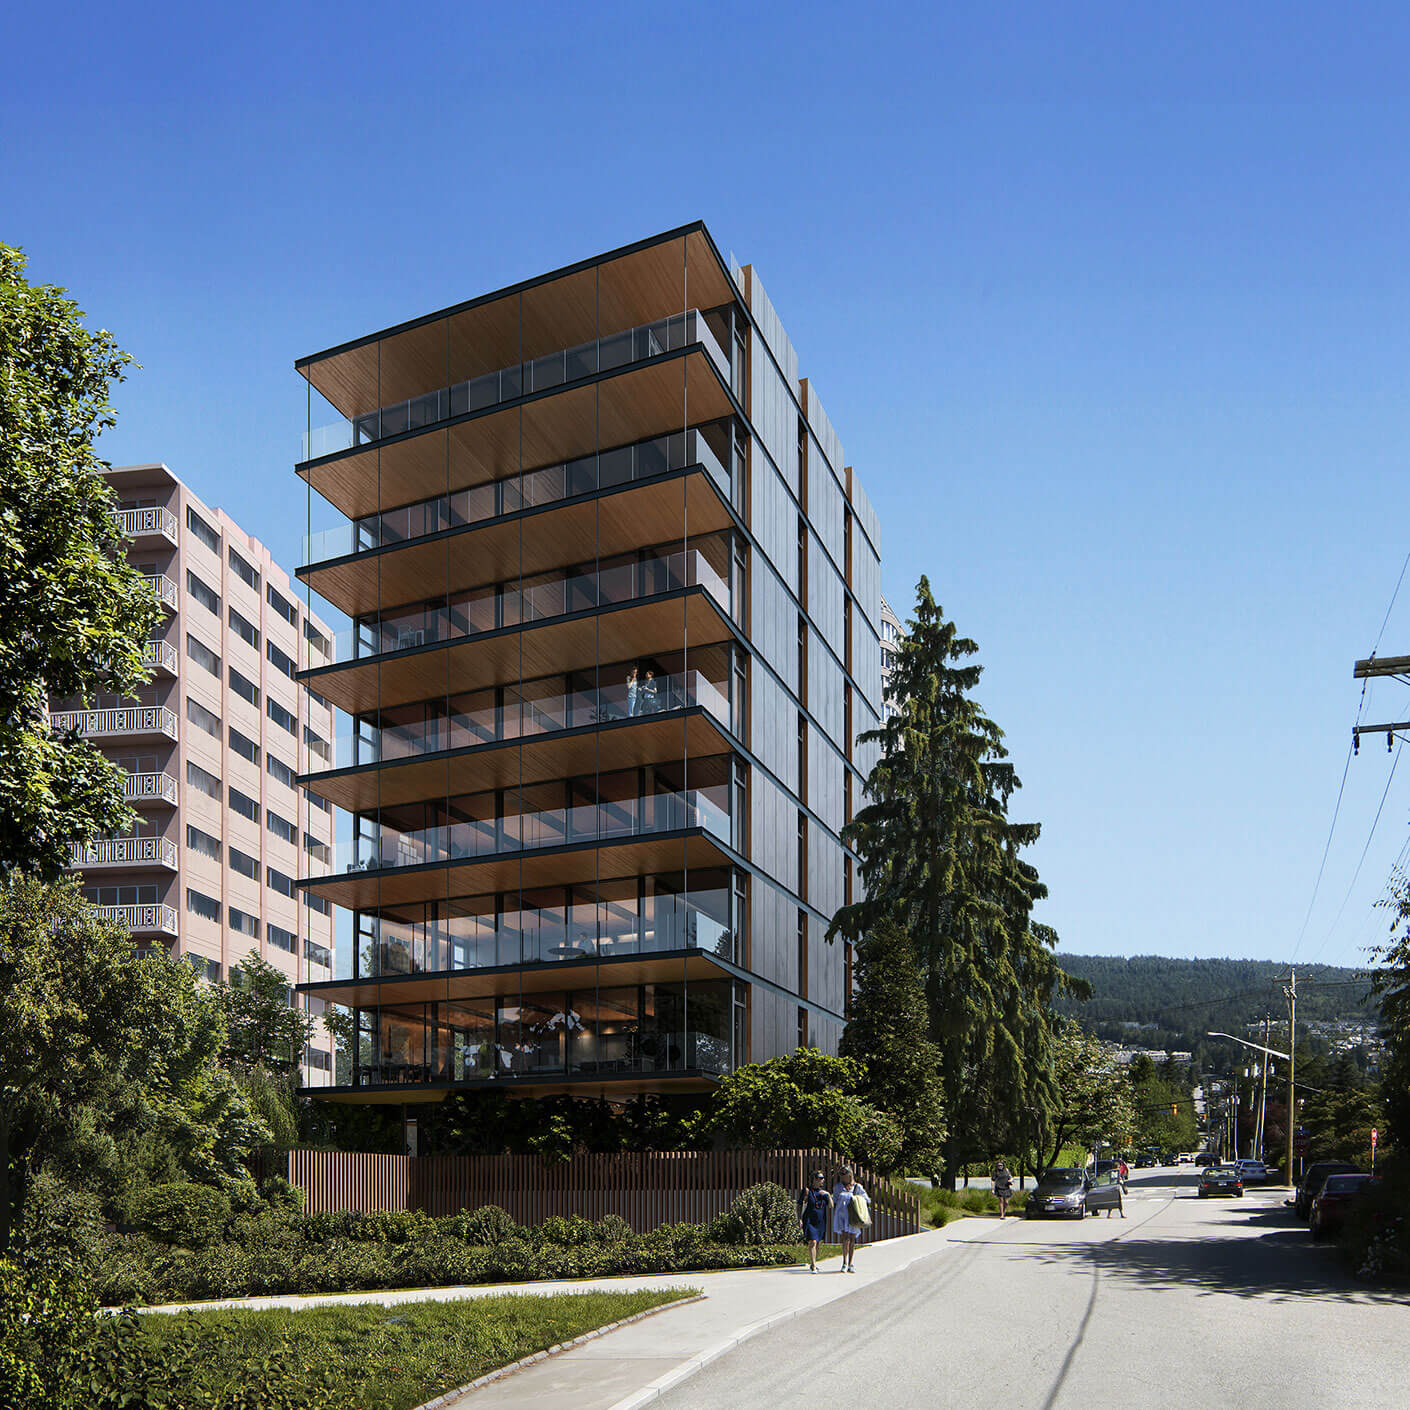 Rendering of the front of the Bellevue project looking north showing the large full width balconies.